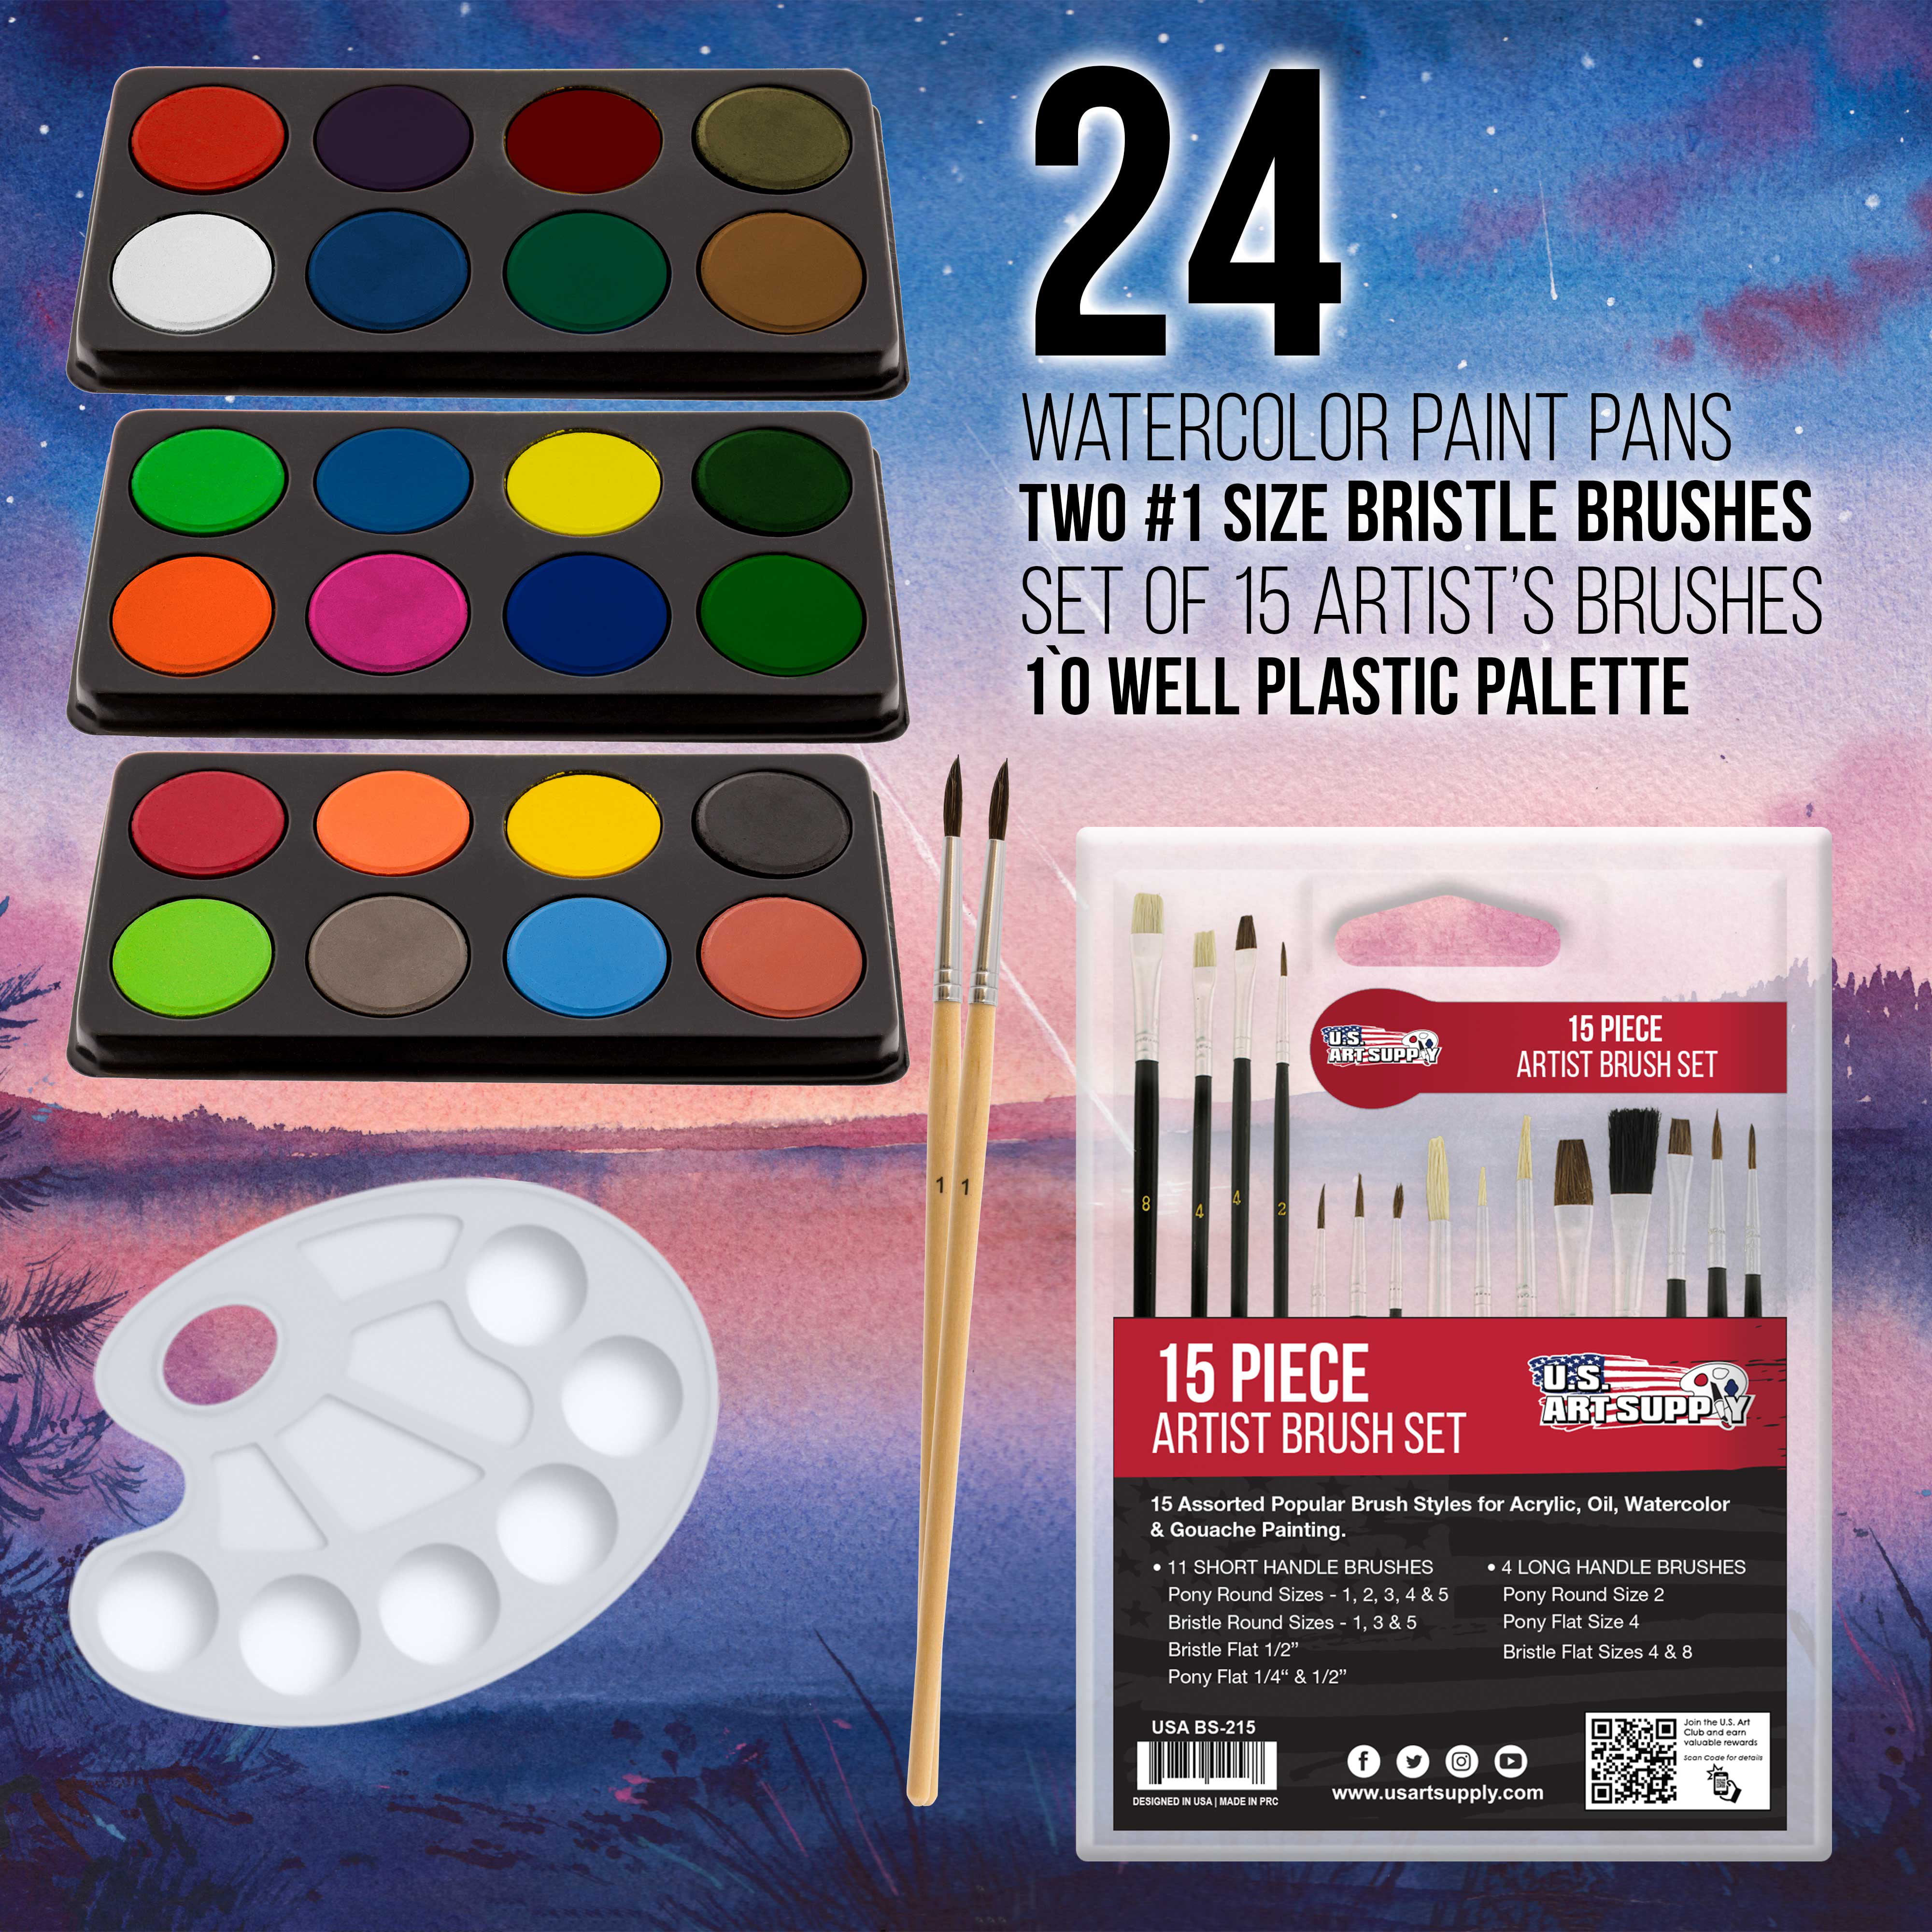 Art Supplies for Painting and Drawing - What Do I Need? – Chuck Black Art